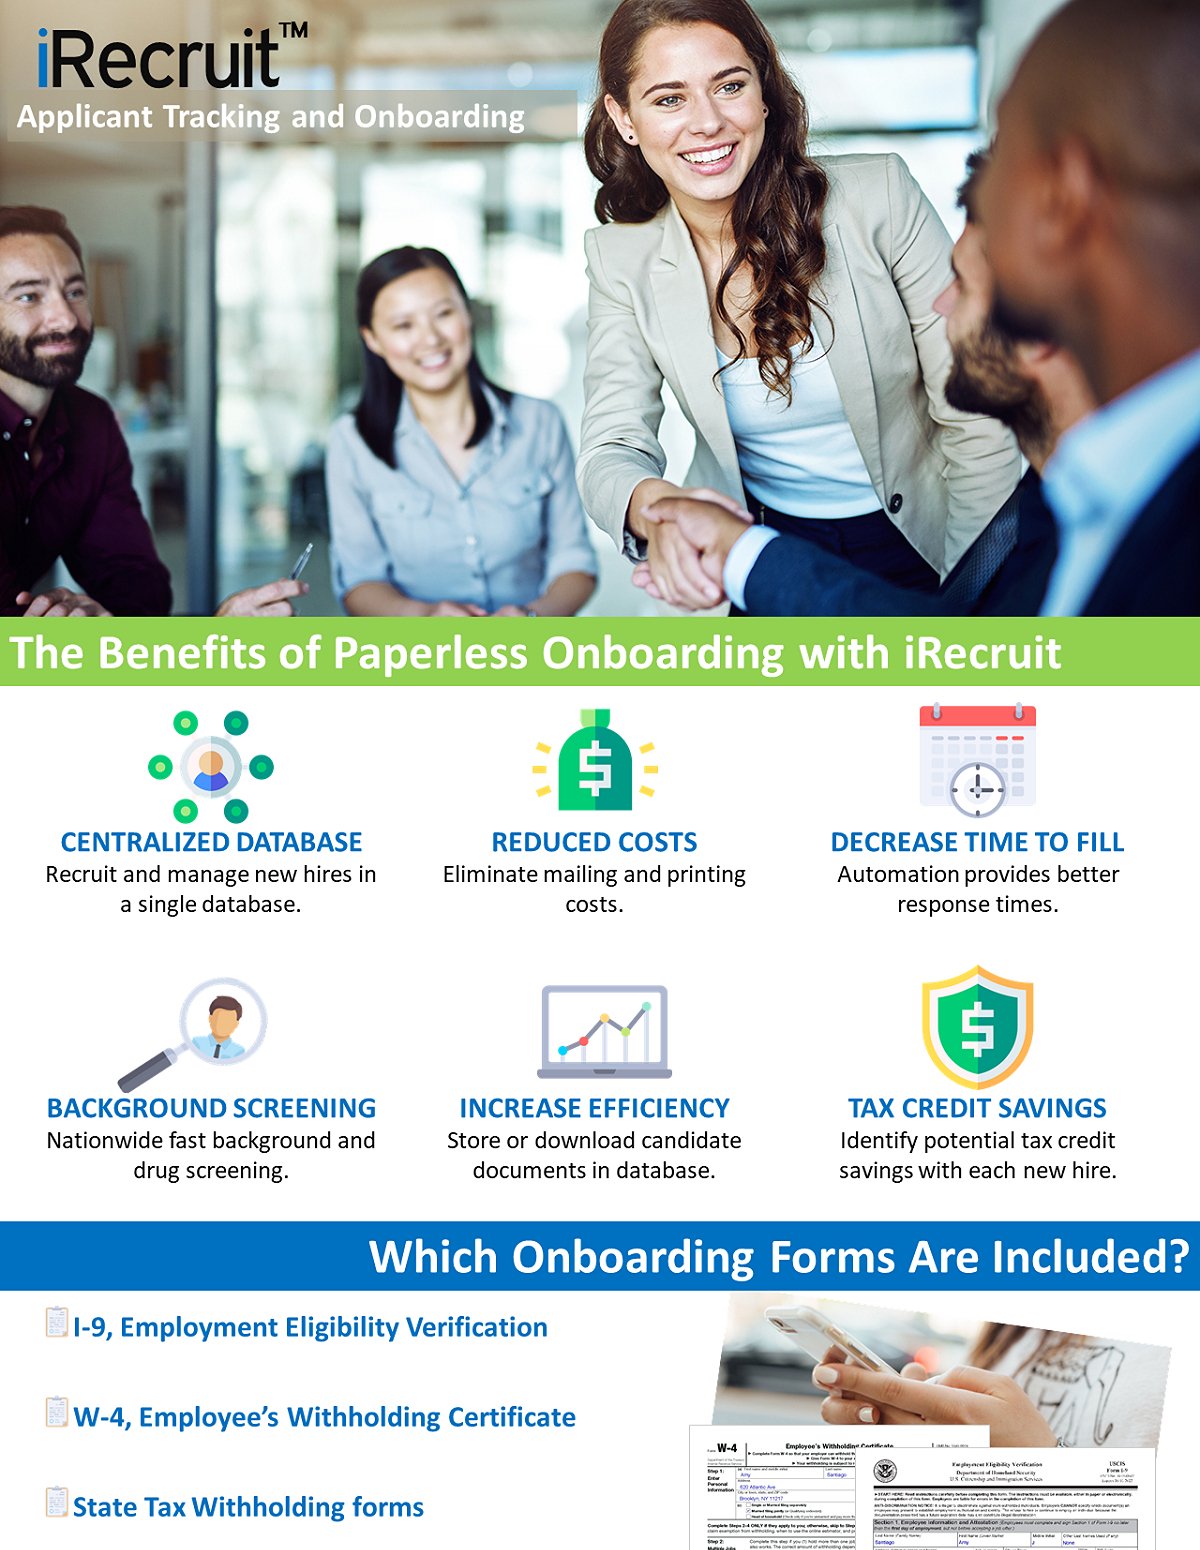 The Benefits of Paperless Remote Onboarding with iRecruit Infographic